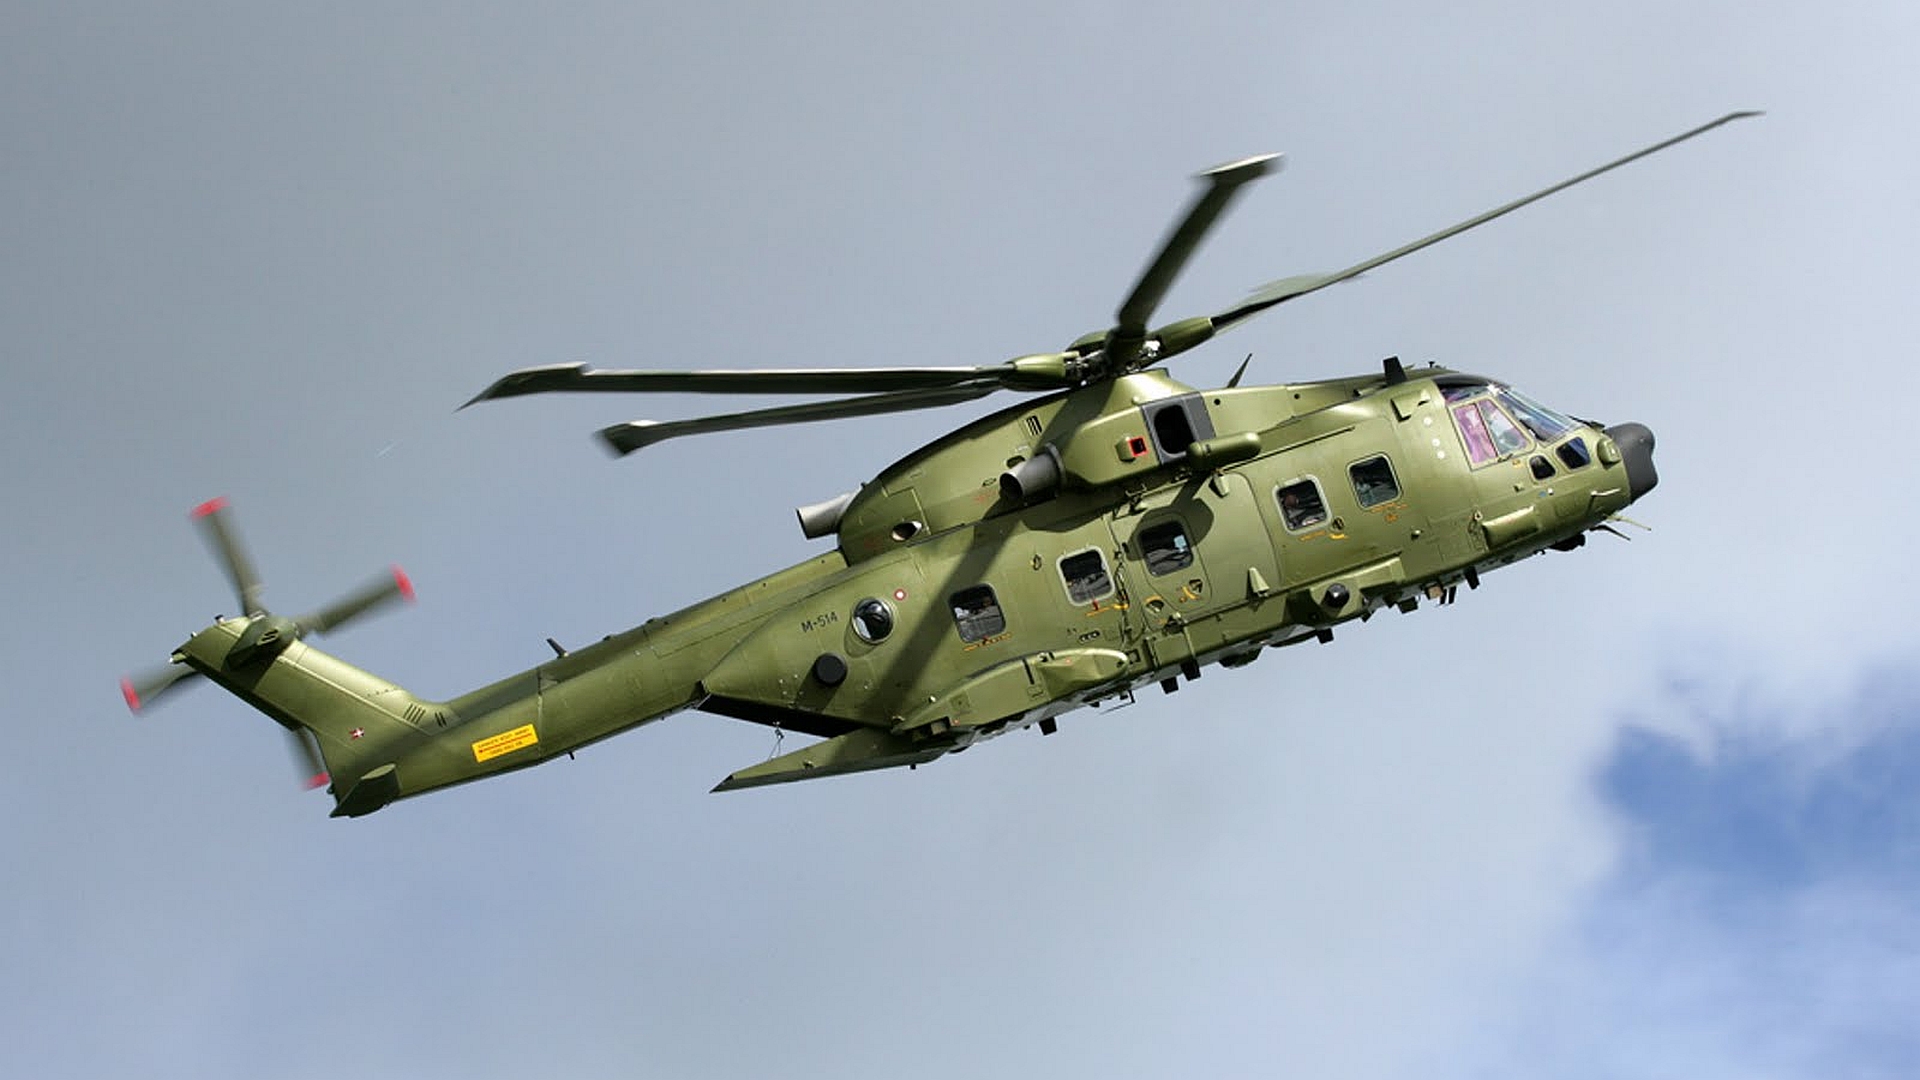 Military AgustaWestland AW101 HD Wallpaper | Background Image